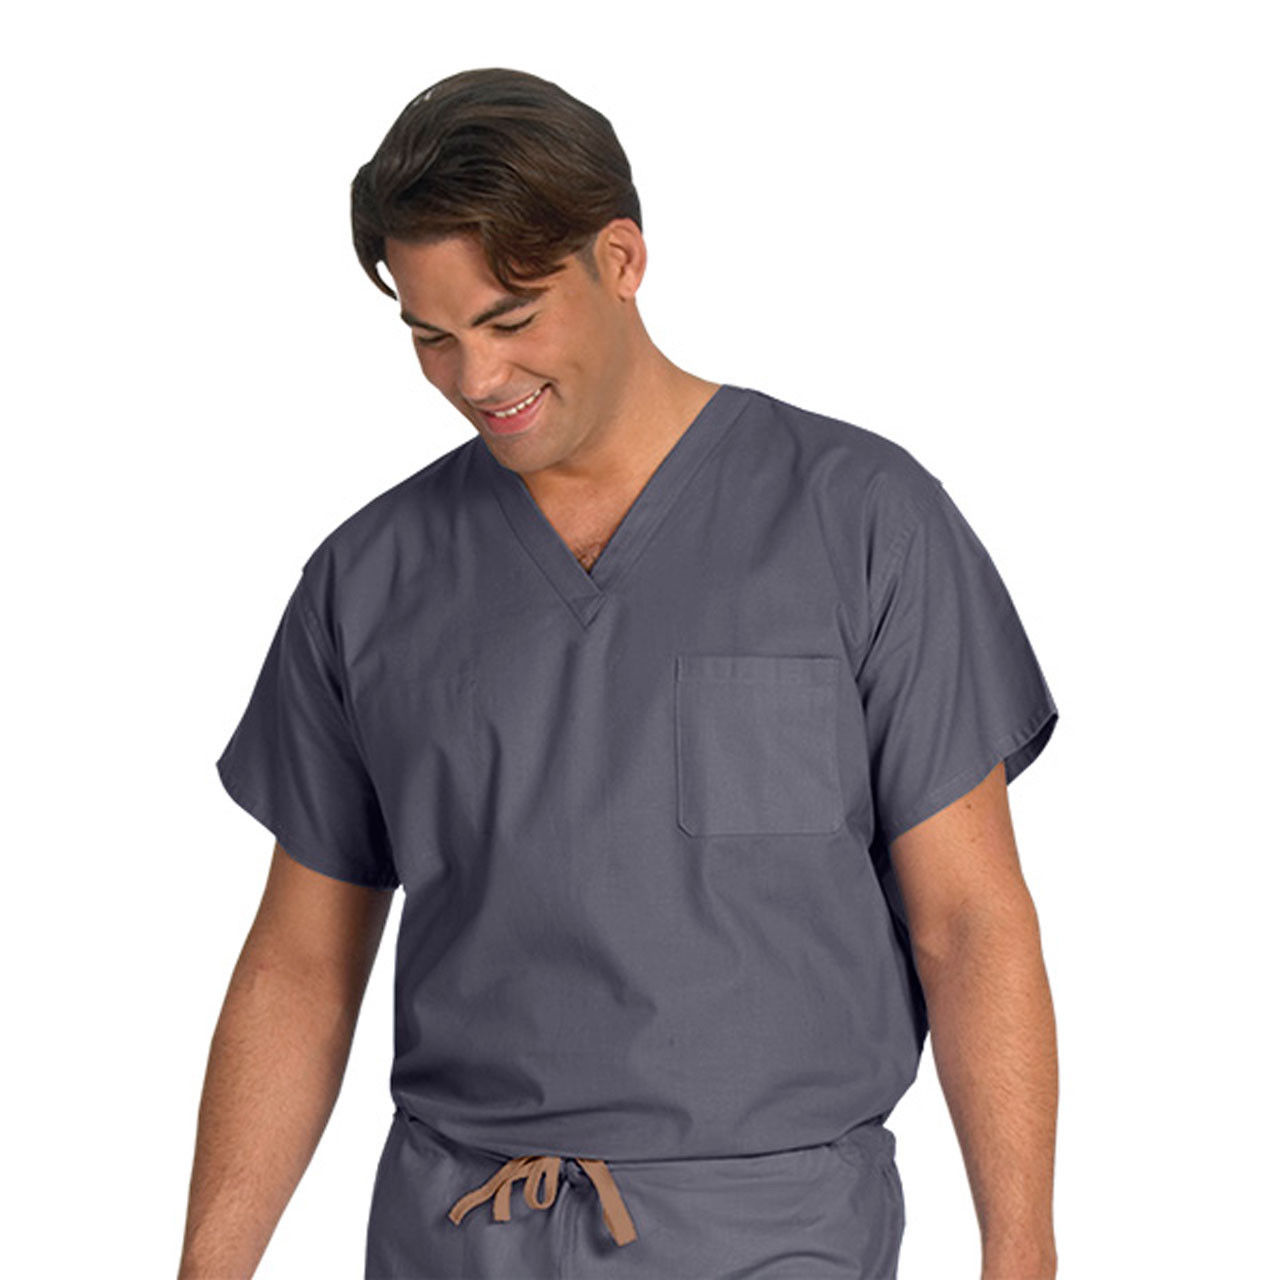 Unisex Scrub Top and Scrub Bottom, with Pocket, Pewter Gray - In Bulk Case of 12 or 72 Questions & Answers